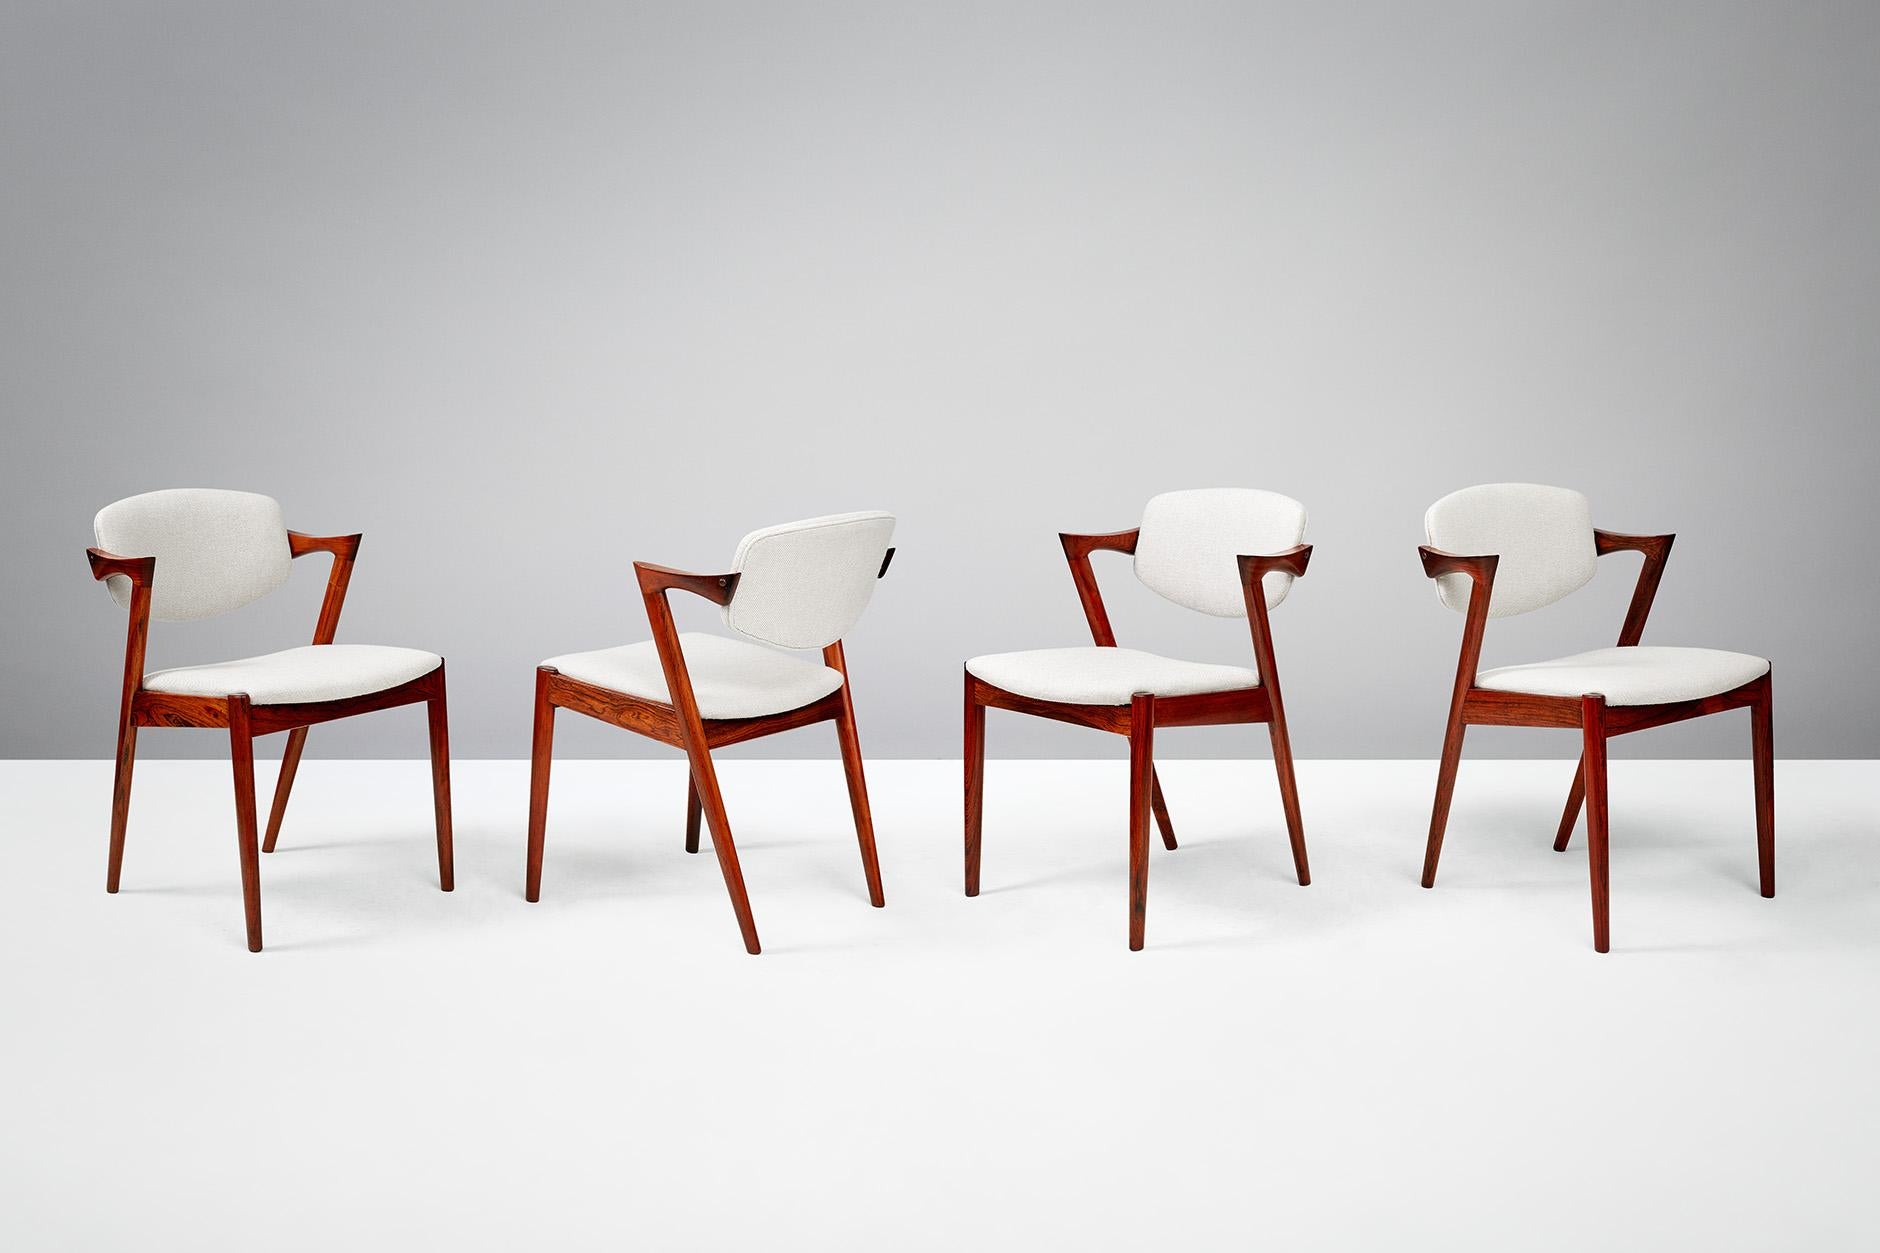 Kai Kristiansen
Model 42 dining chairs, 1956.

Set of eight dining chairs produced by Skovman Andersen for the Illum Bolighus department store in Copenhagen. Refinished rosewood frames with seat and back reupholstered with Kvadrat Hallingdal wool